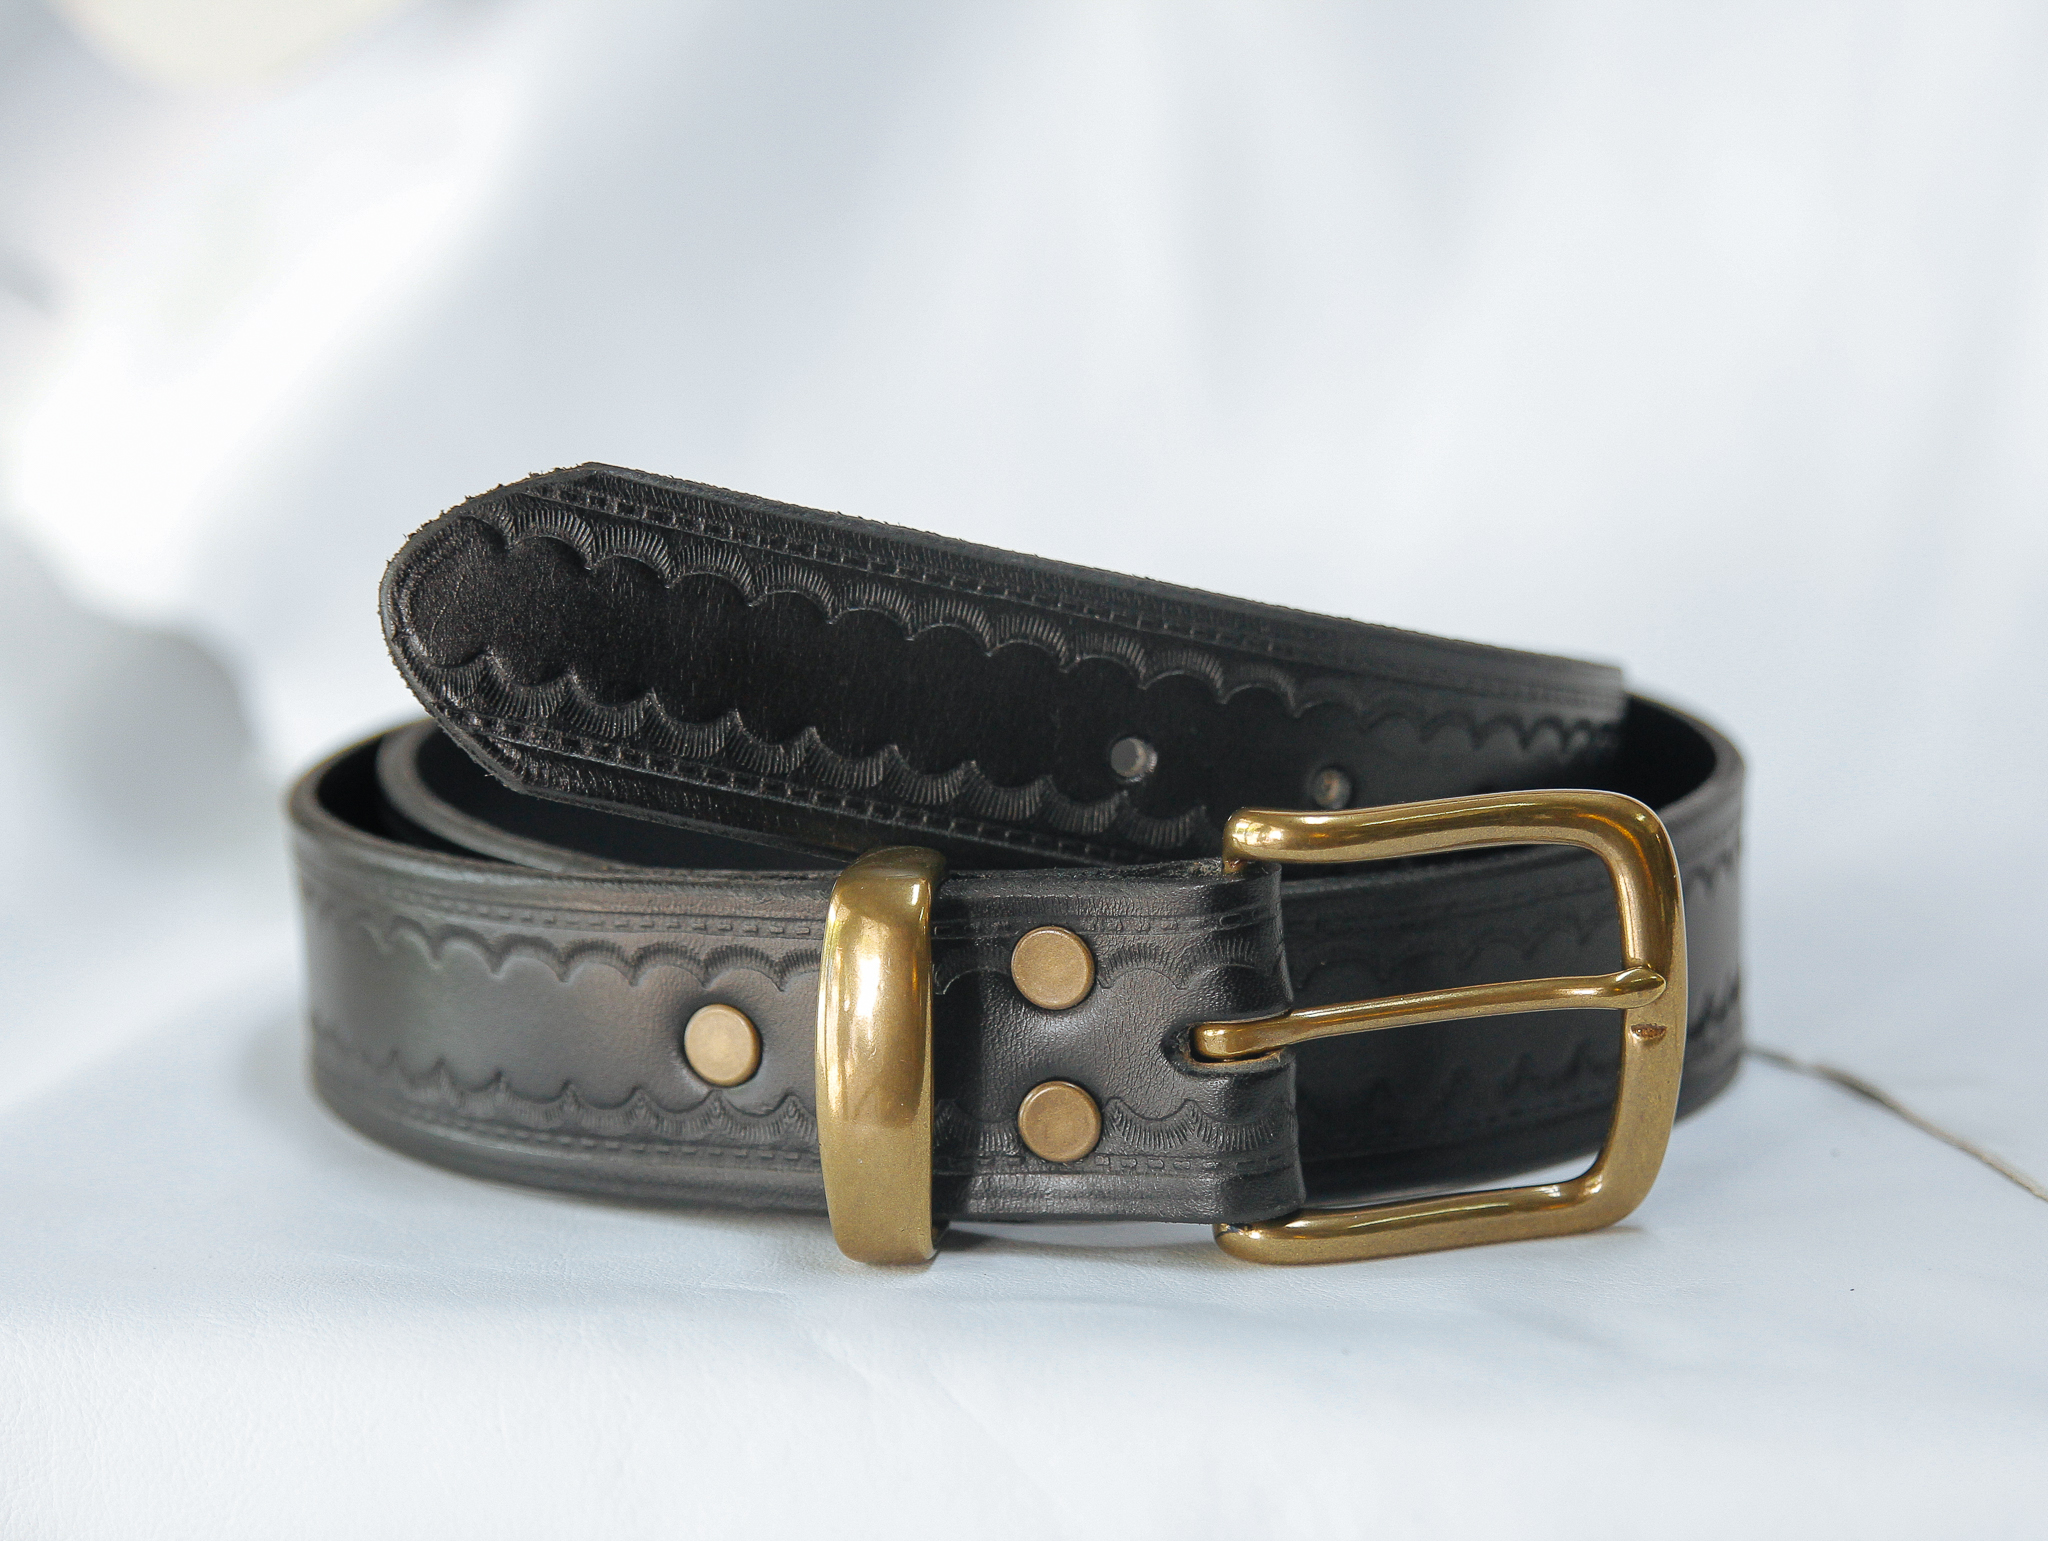 Kangaroo & Cowhide Leather Belts - The Australian Made Campaign